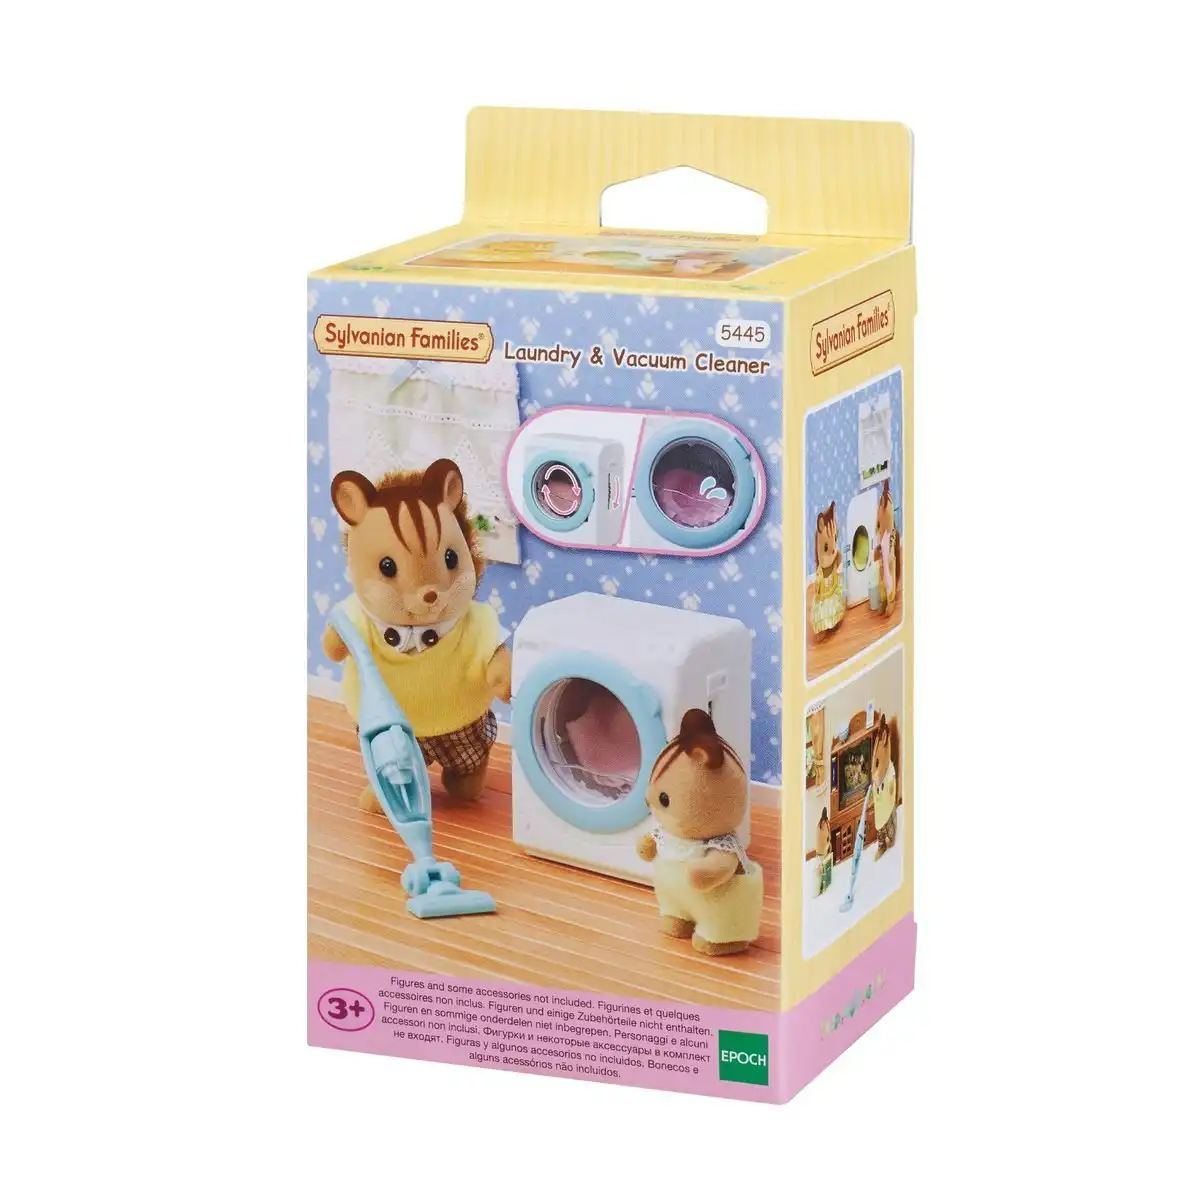 Sylvanian Families - Laundry And Vacuum Cleaner Animal Doll Playset